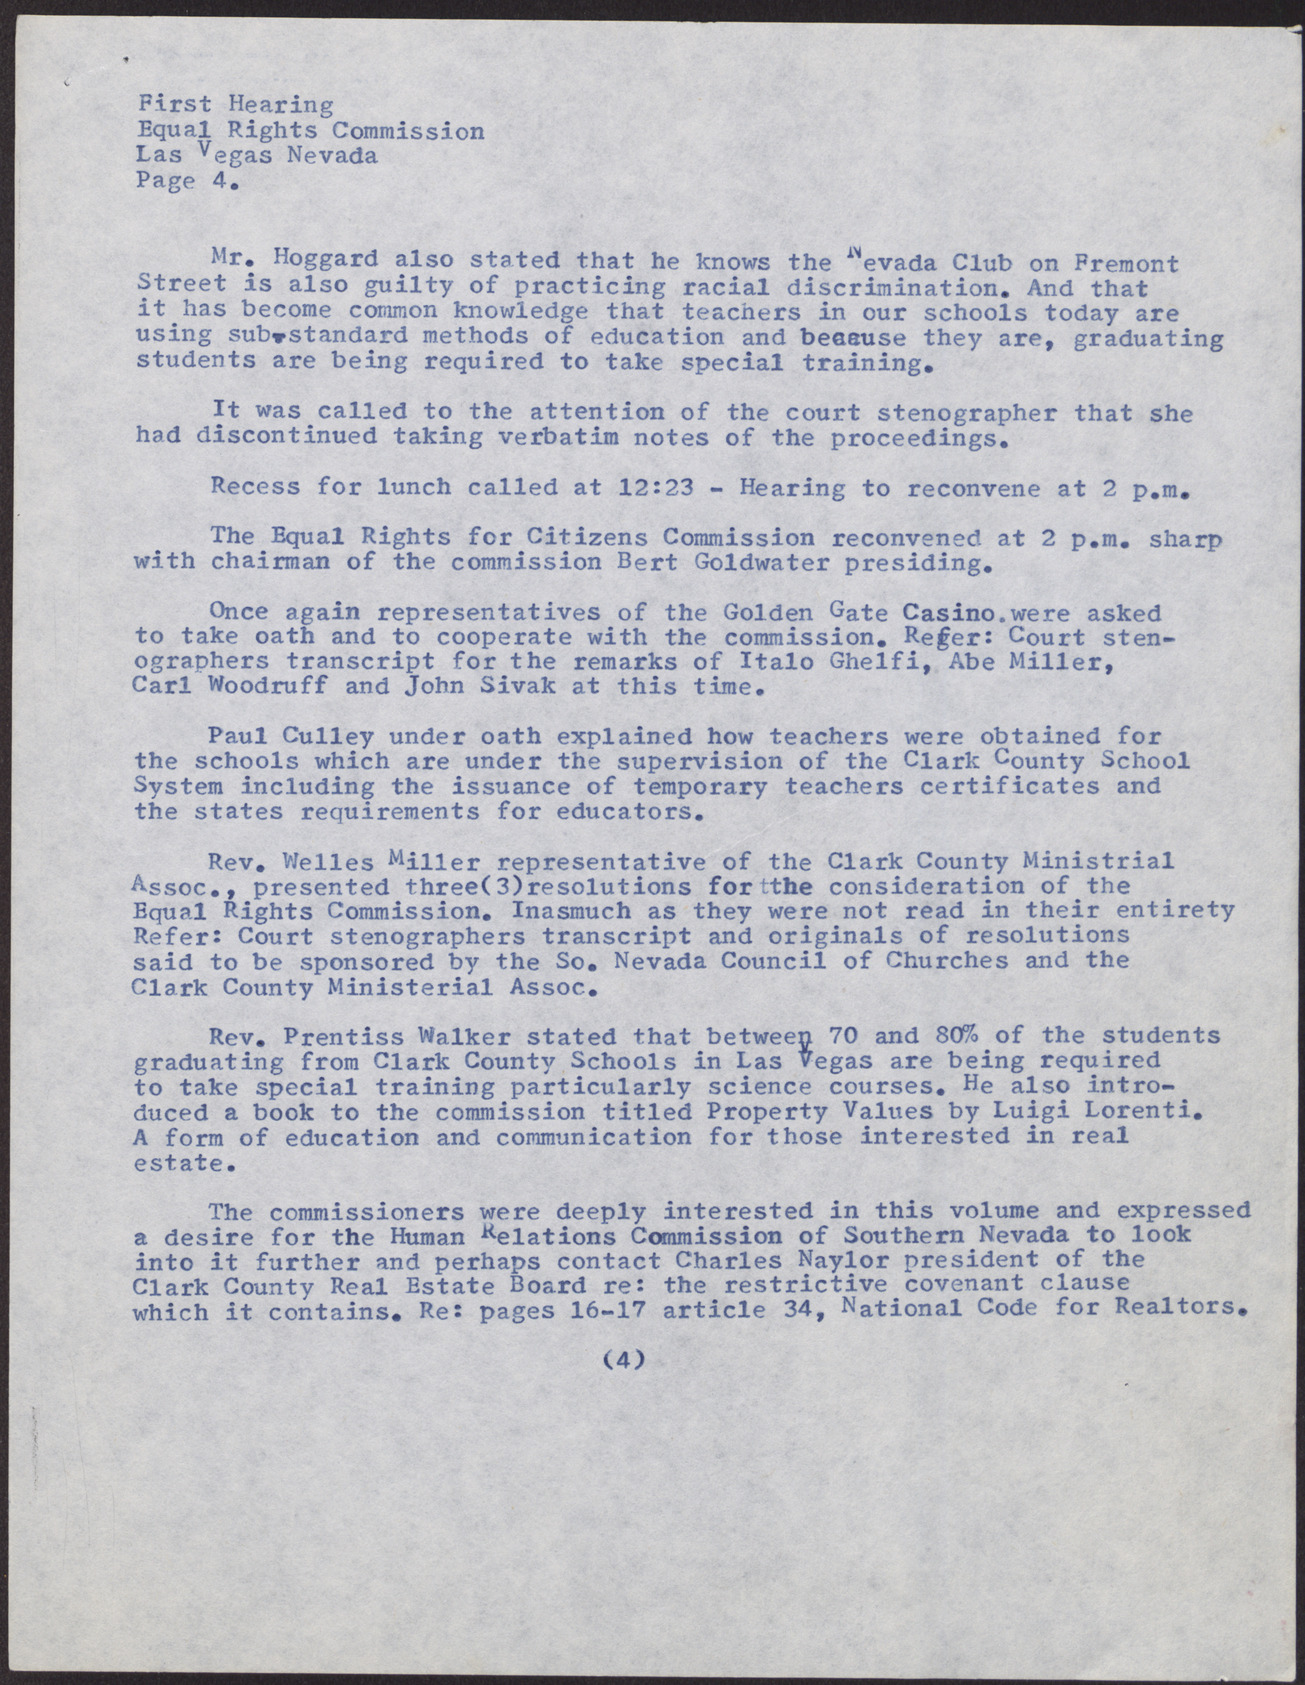 Minutes for the State of Nevada Equal Rights Commission First Hearing (5 pages), July 15, 1961, page 4